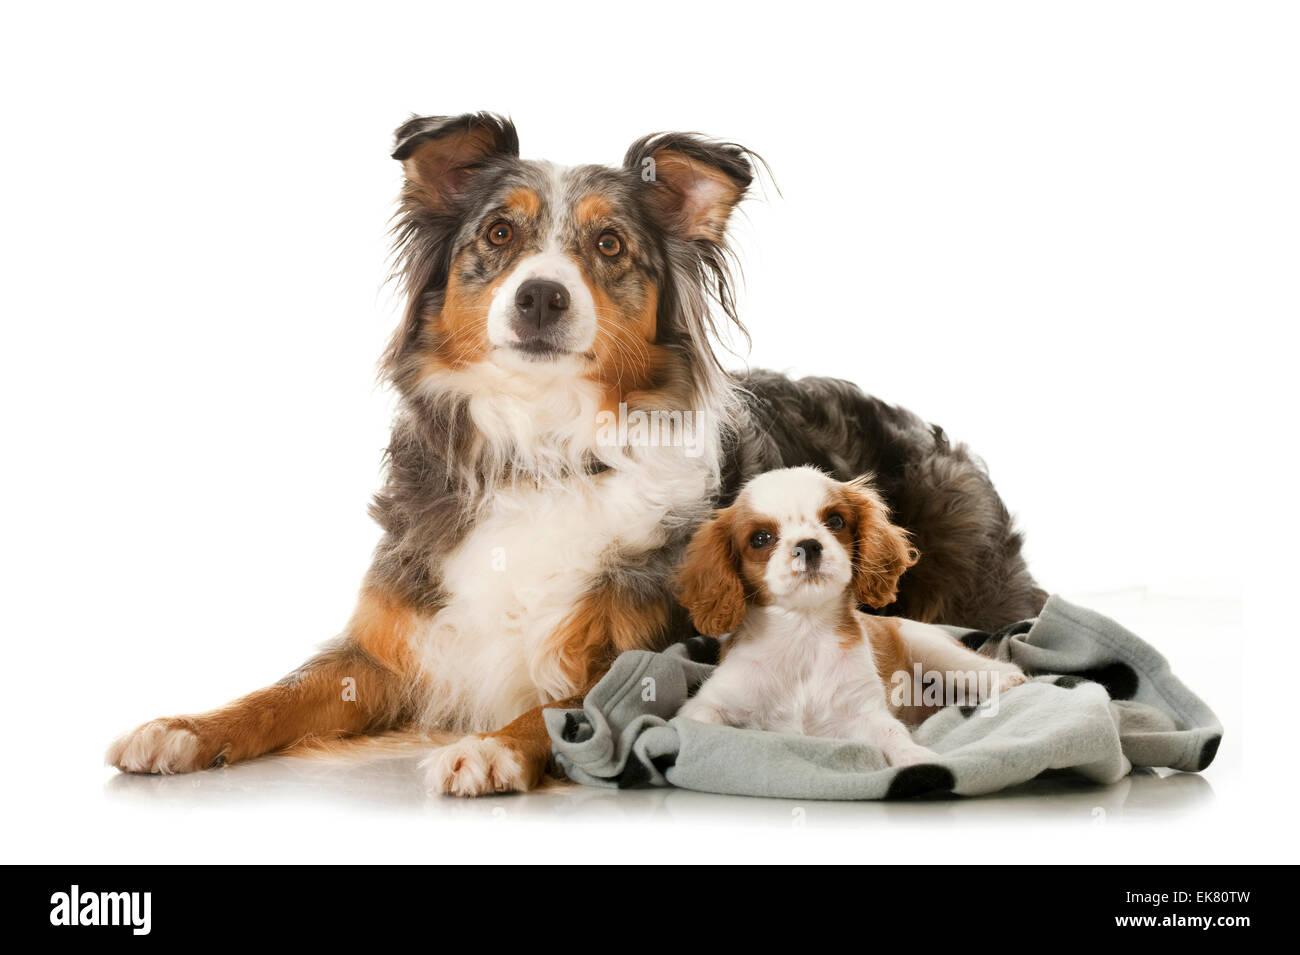 Adult Australian Shepherd Cavalier King Charles Spaniel puppy lying next to each other Studio picture against white background Stock Photo